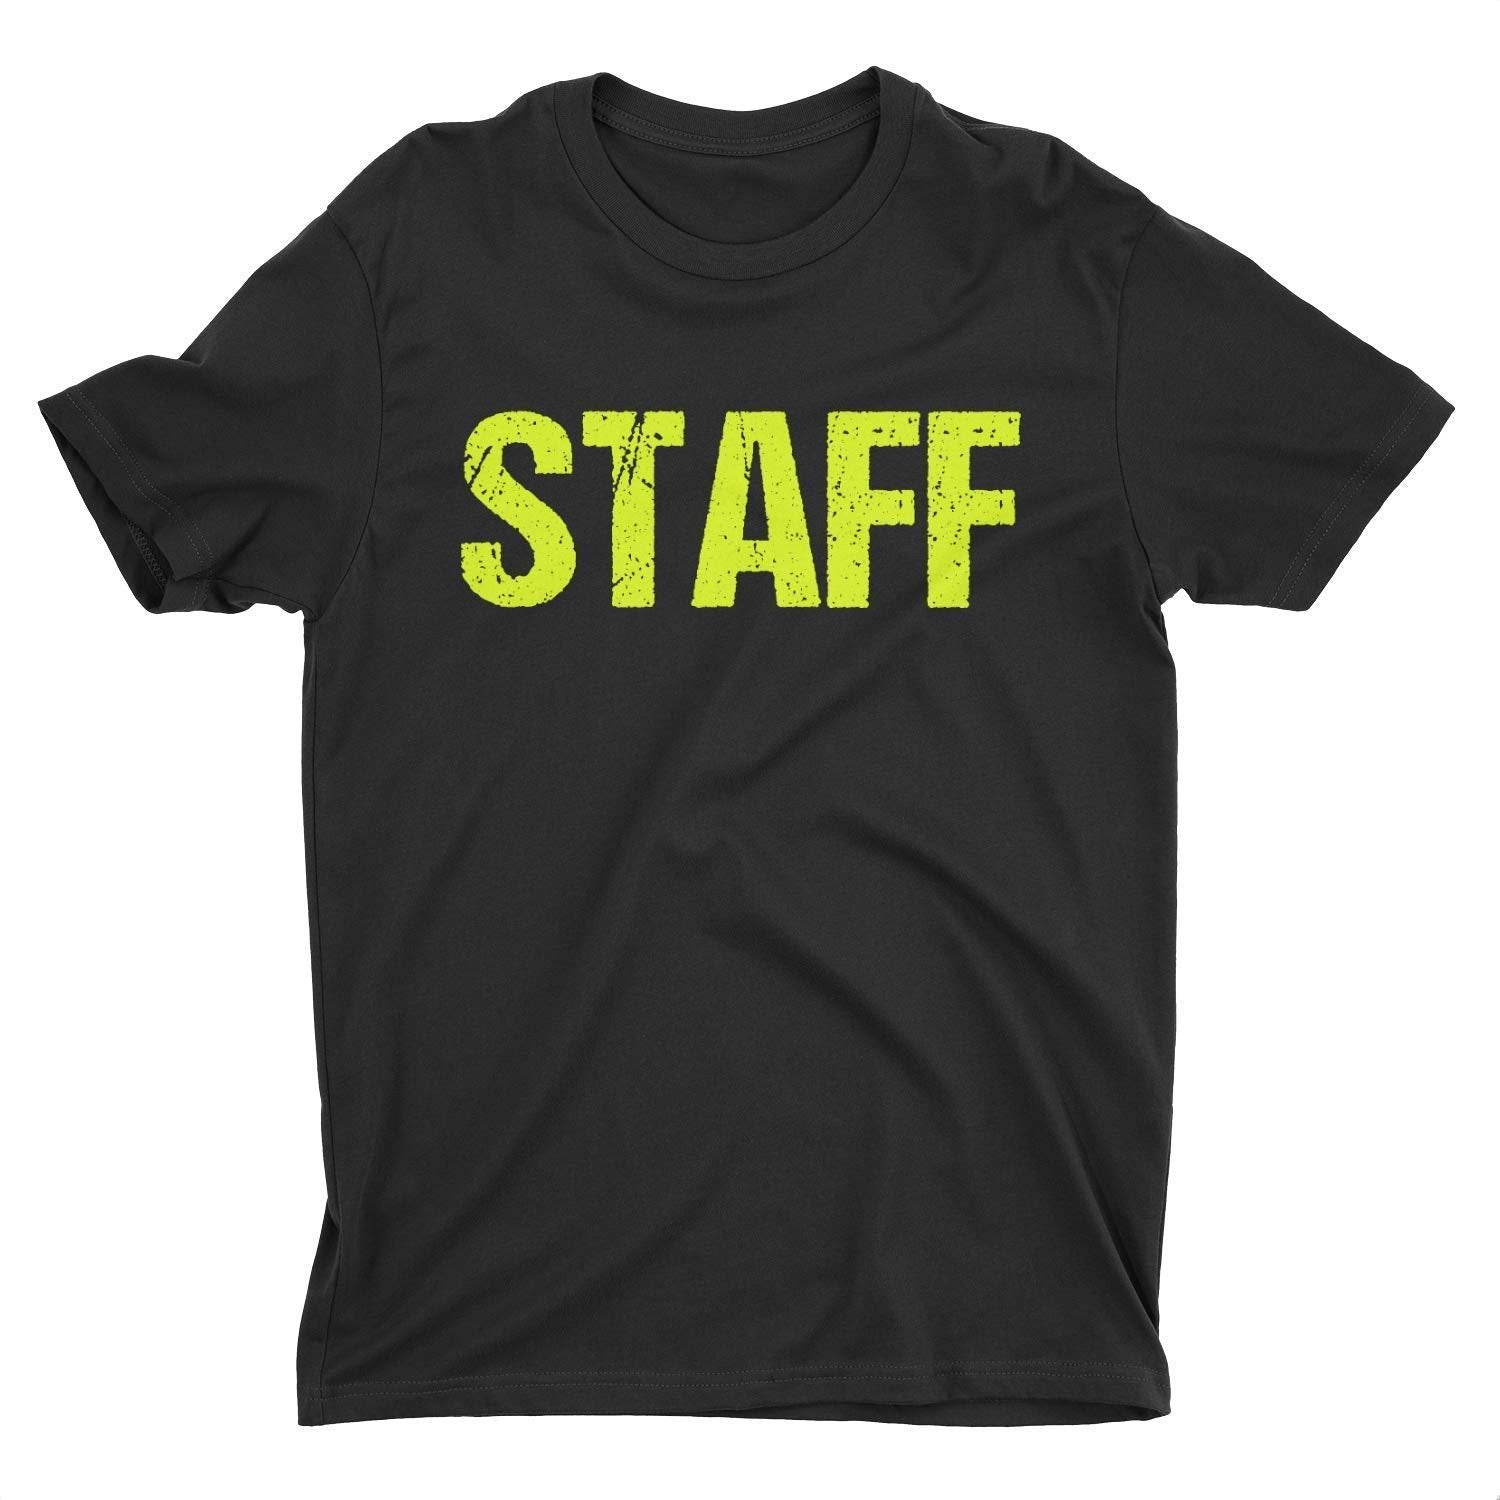 Staff T-Shirt Screen Printed Front & Back Men's Unisex Style (Black/Neon, Distressed)